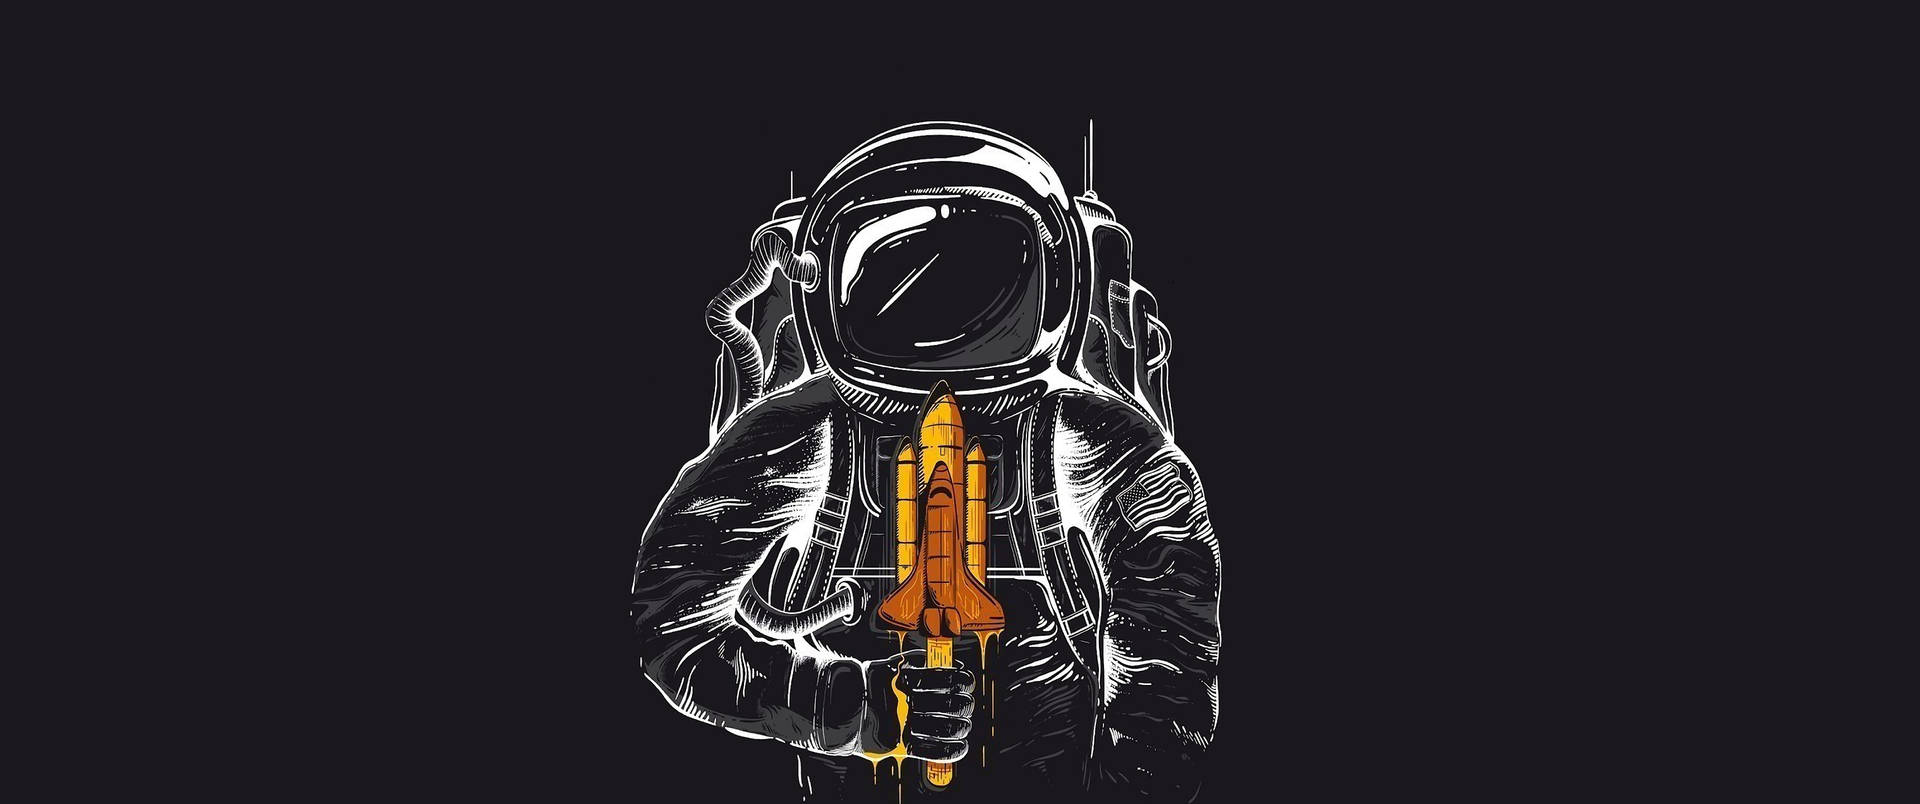 Space Aesthetic Background Wallpaper